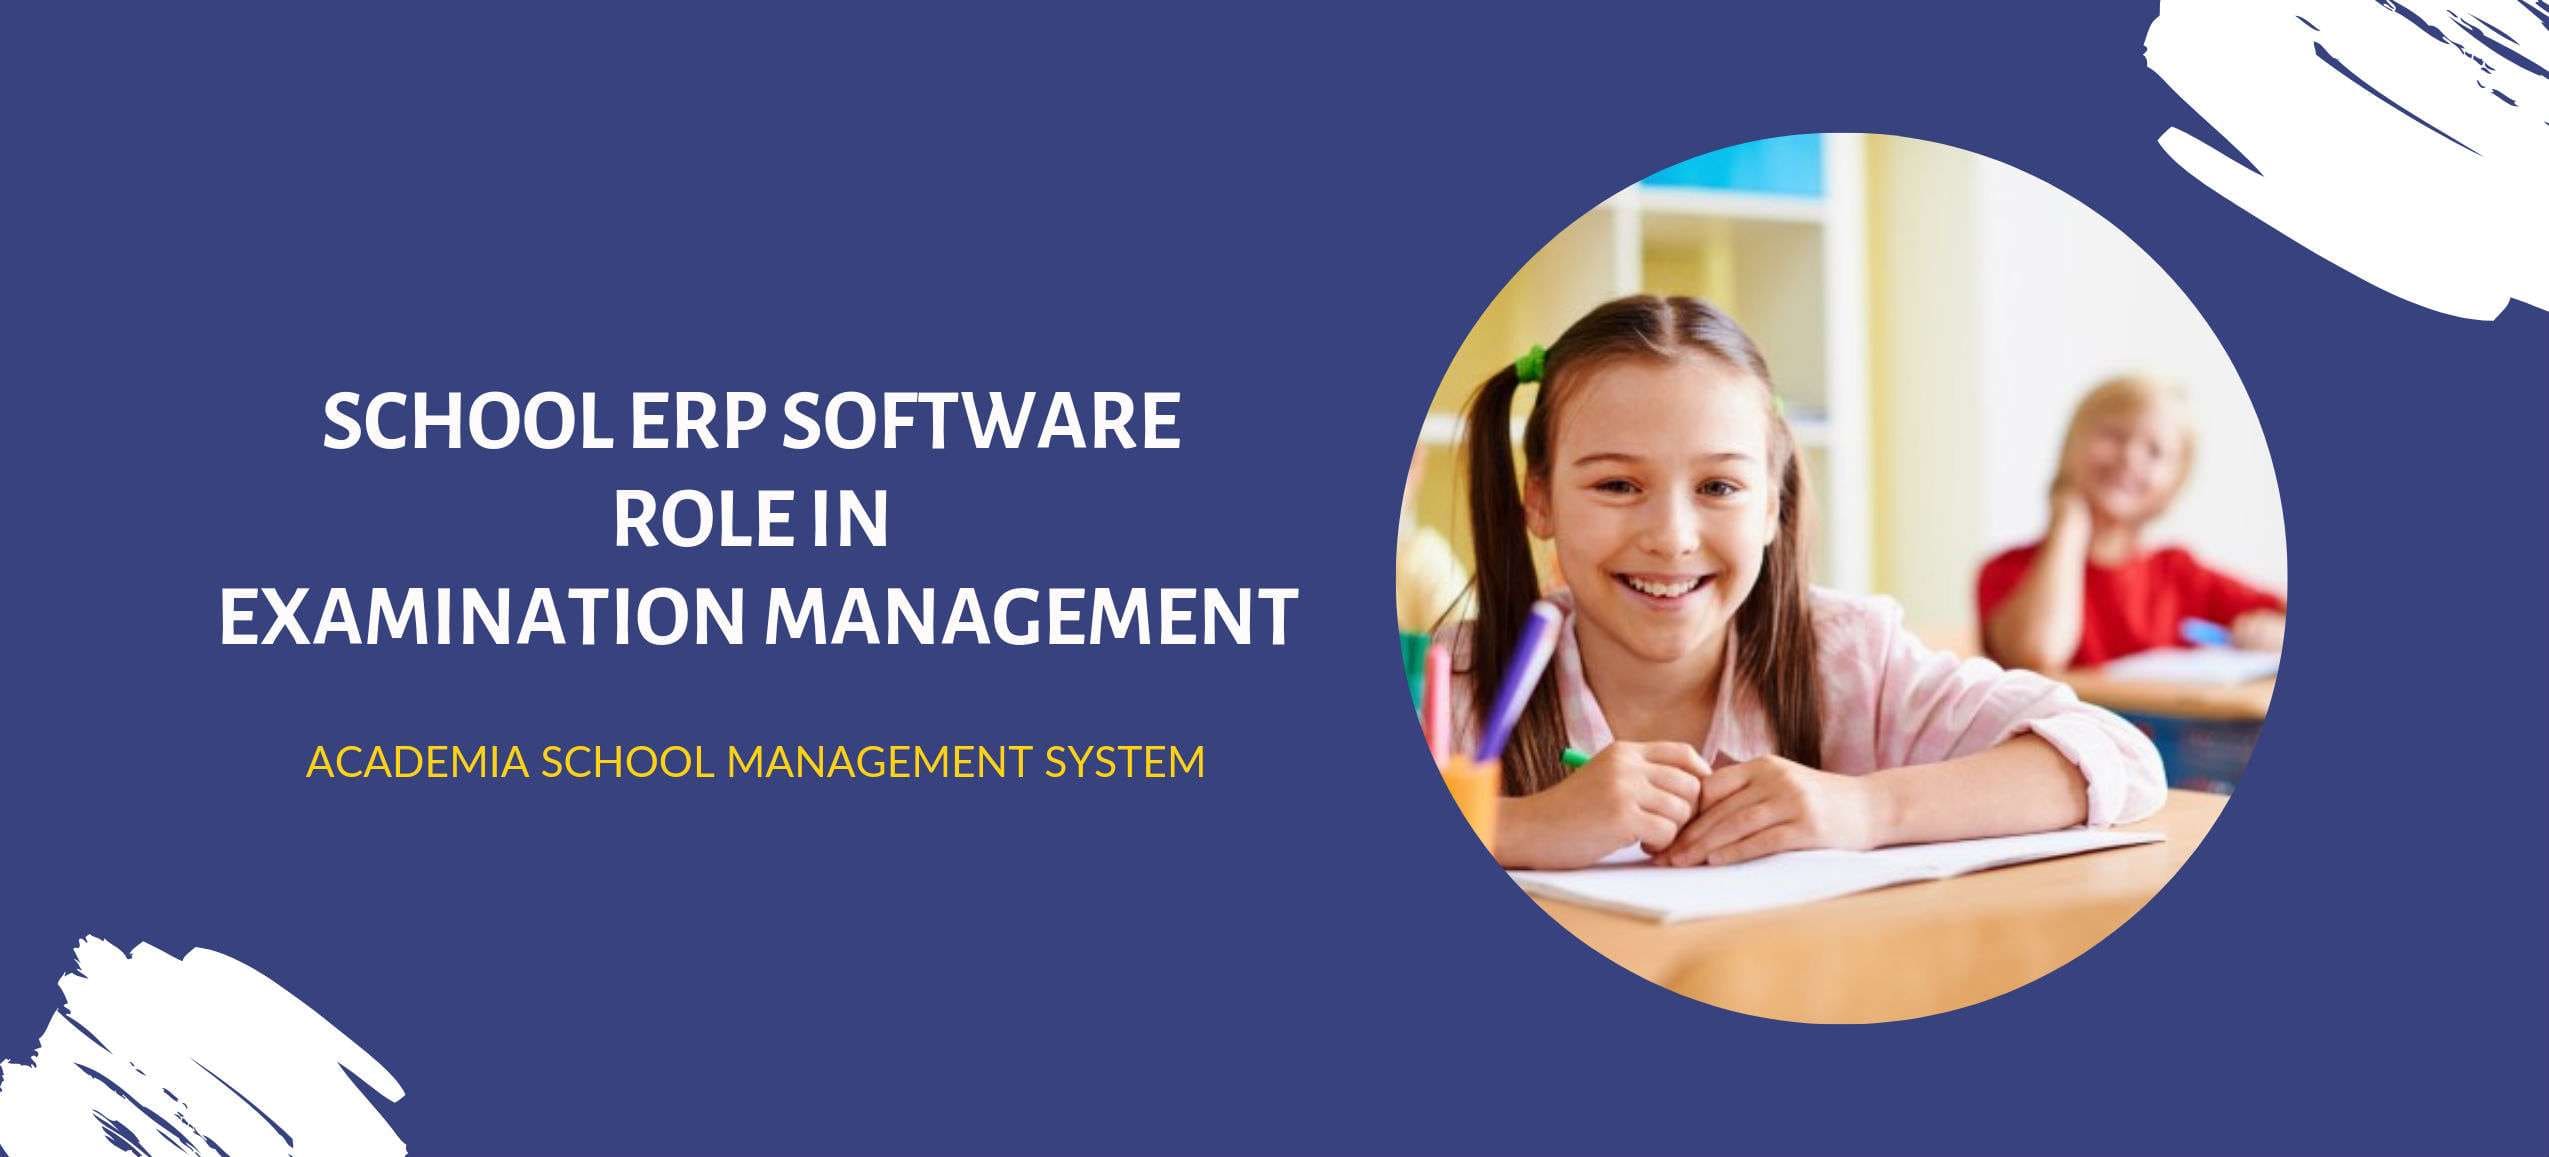 SCHOOL ERP SOFTWARE ROLE IN EXAMINATION MANAGEMENT- Academia school management software